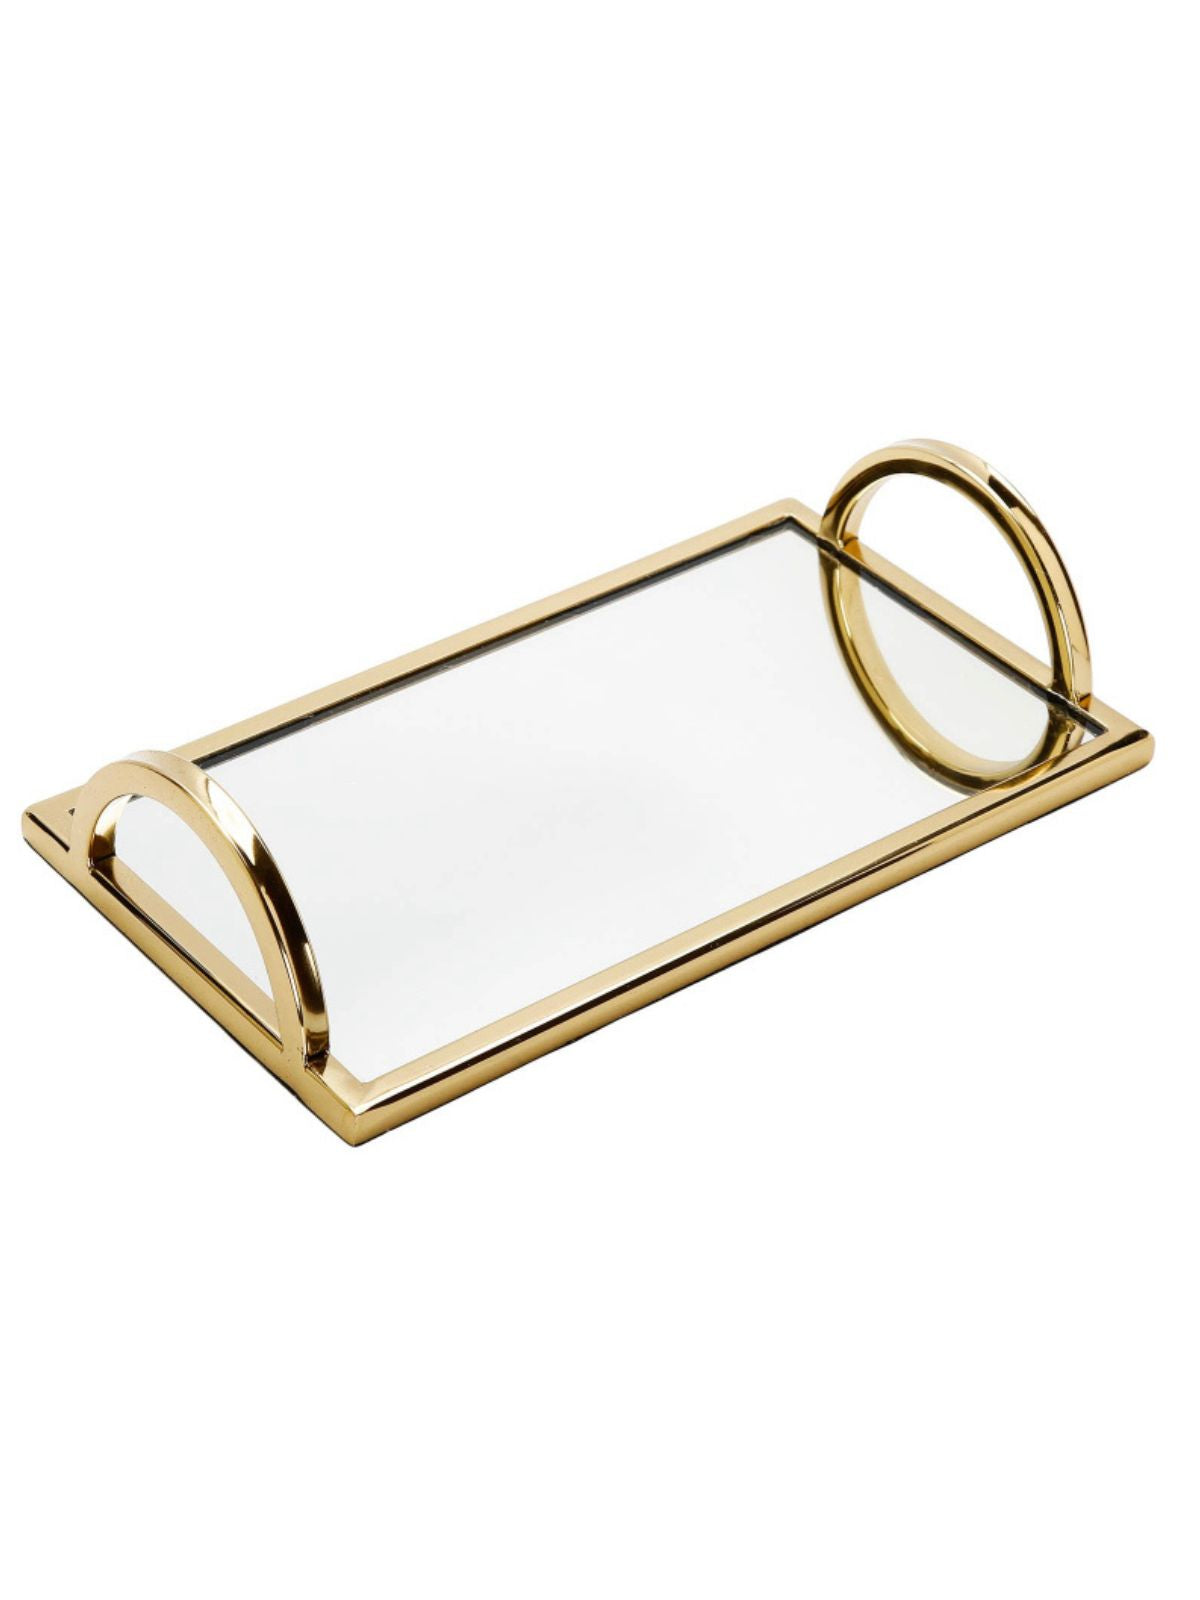 Small Rectangular Mirrored Tray with Gold Edging and Handles sold by KYA Home Decor. 